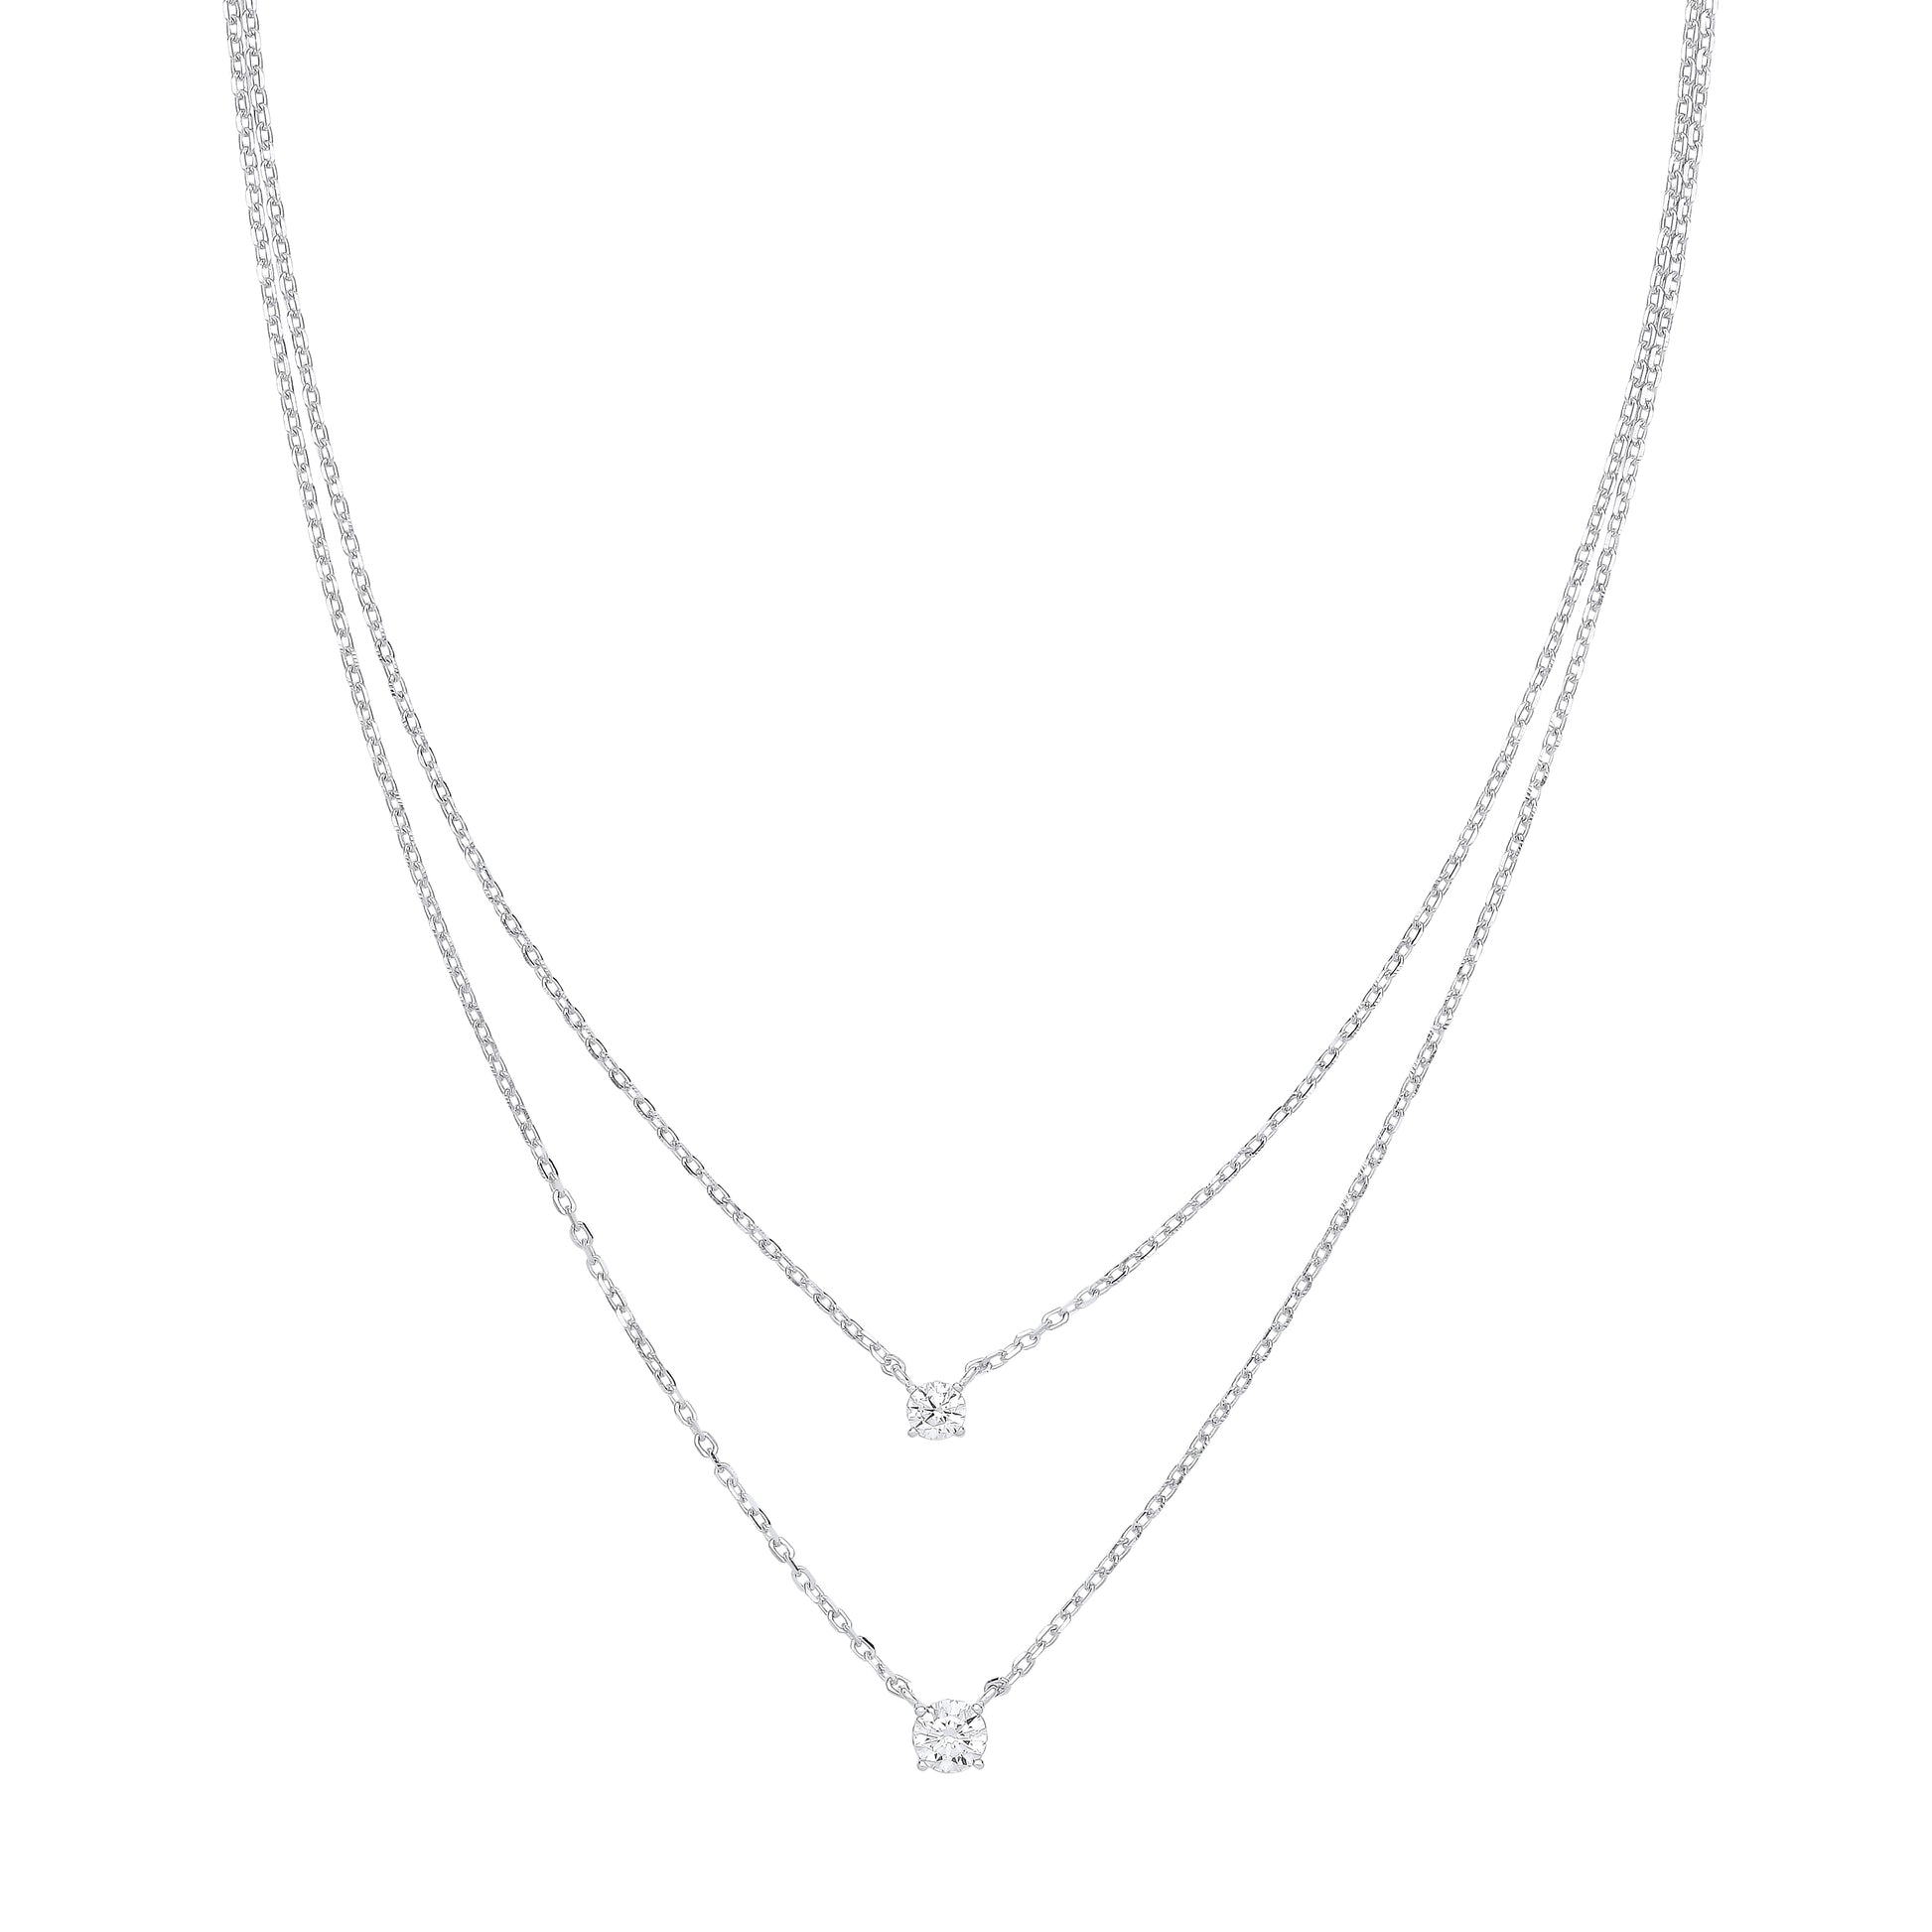 Silver  Lil n Large Solitaire Multi-strand Necklace - GVK394